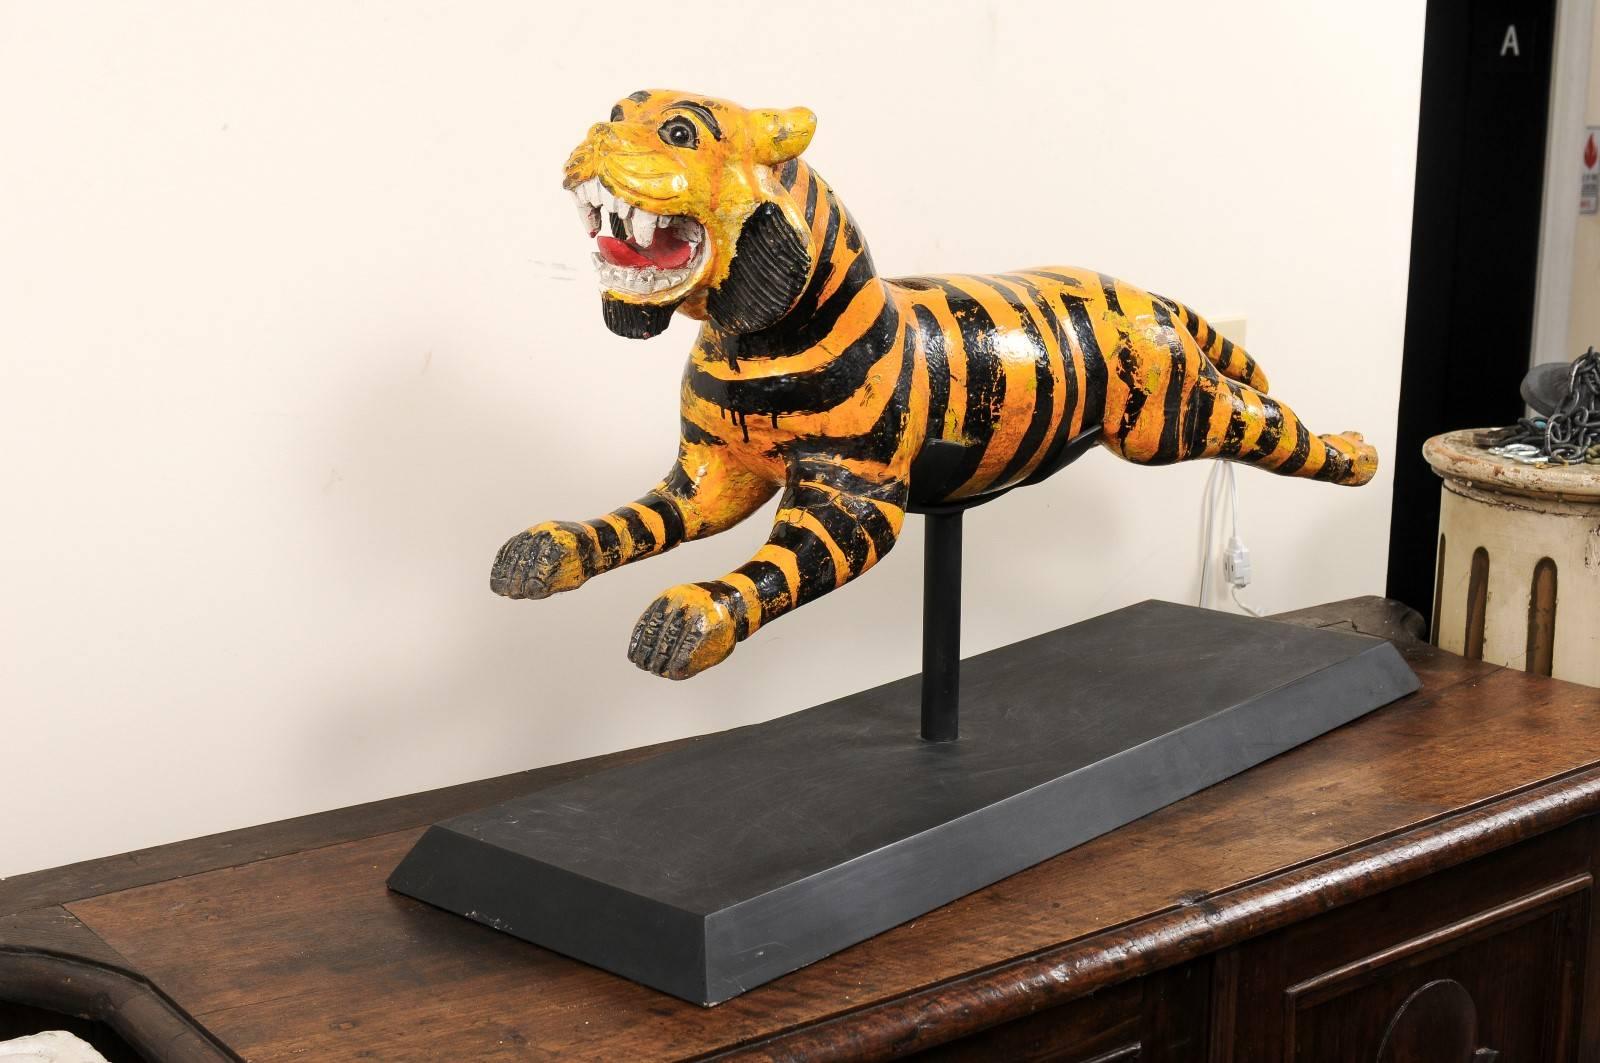 20th Century A Whimsical Merry-go-round Tiger of Carved-Wood with Orange and Black Stripes